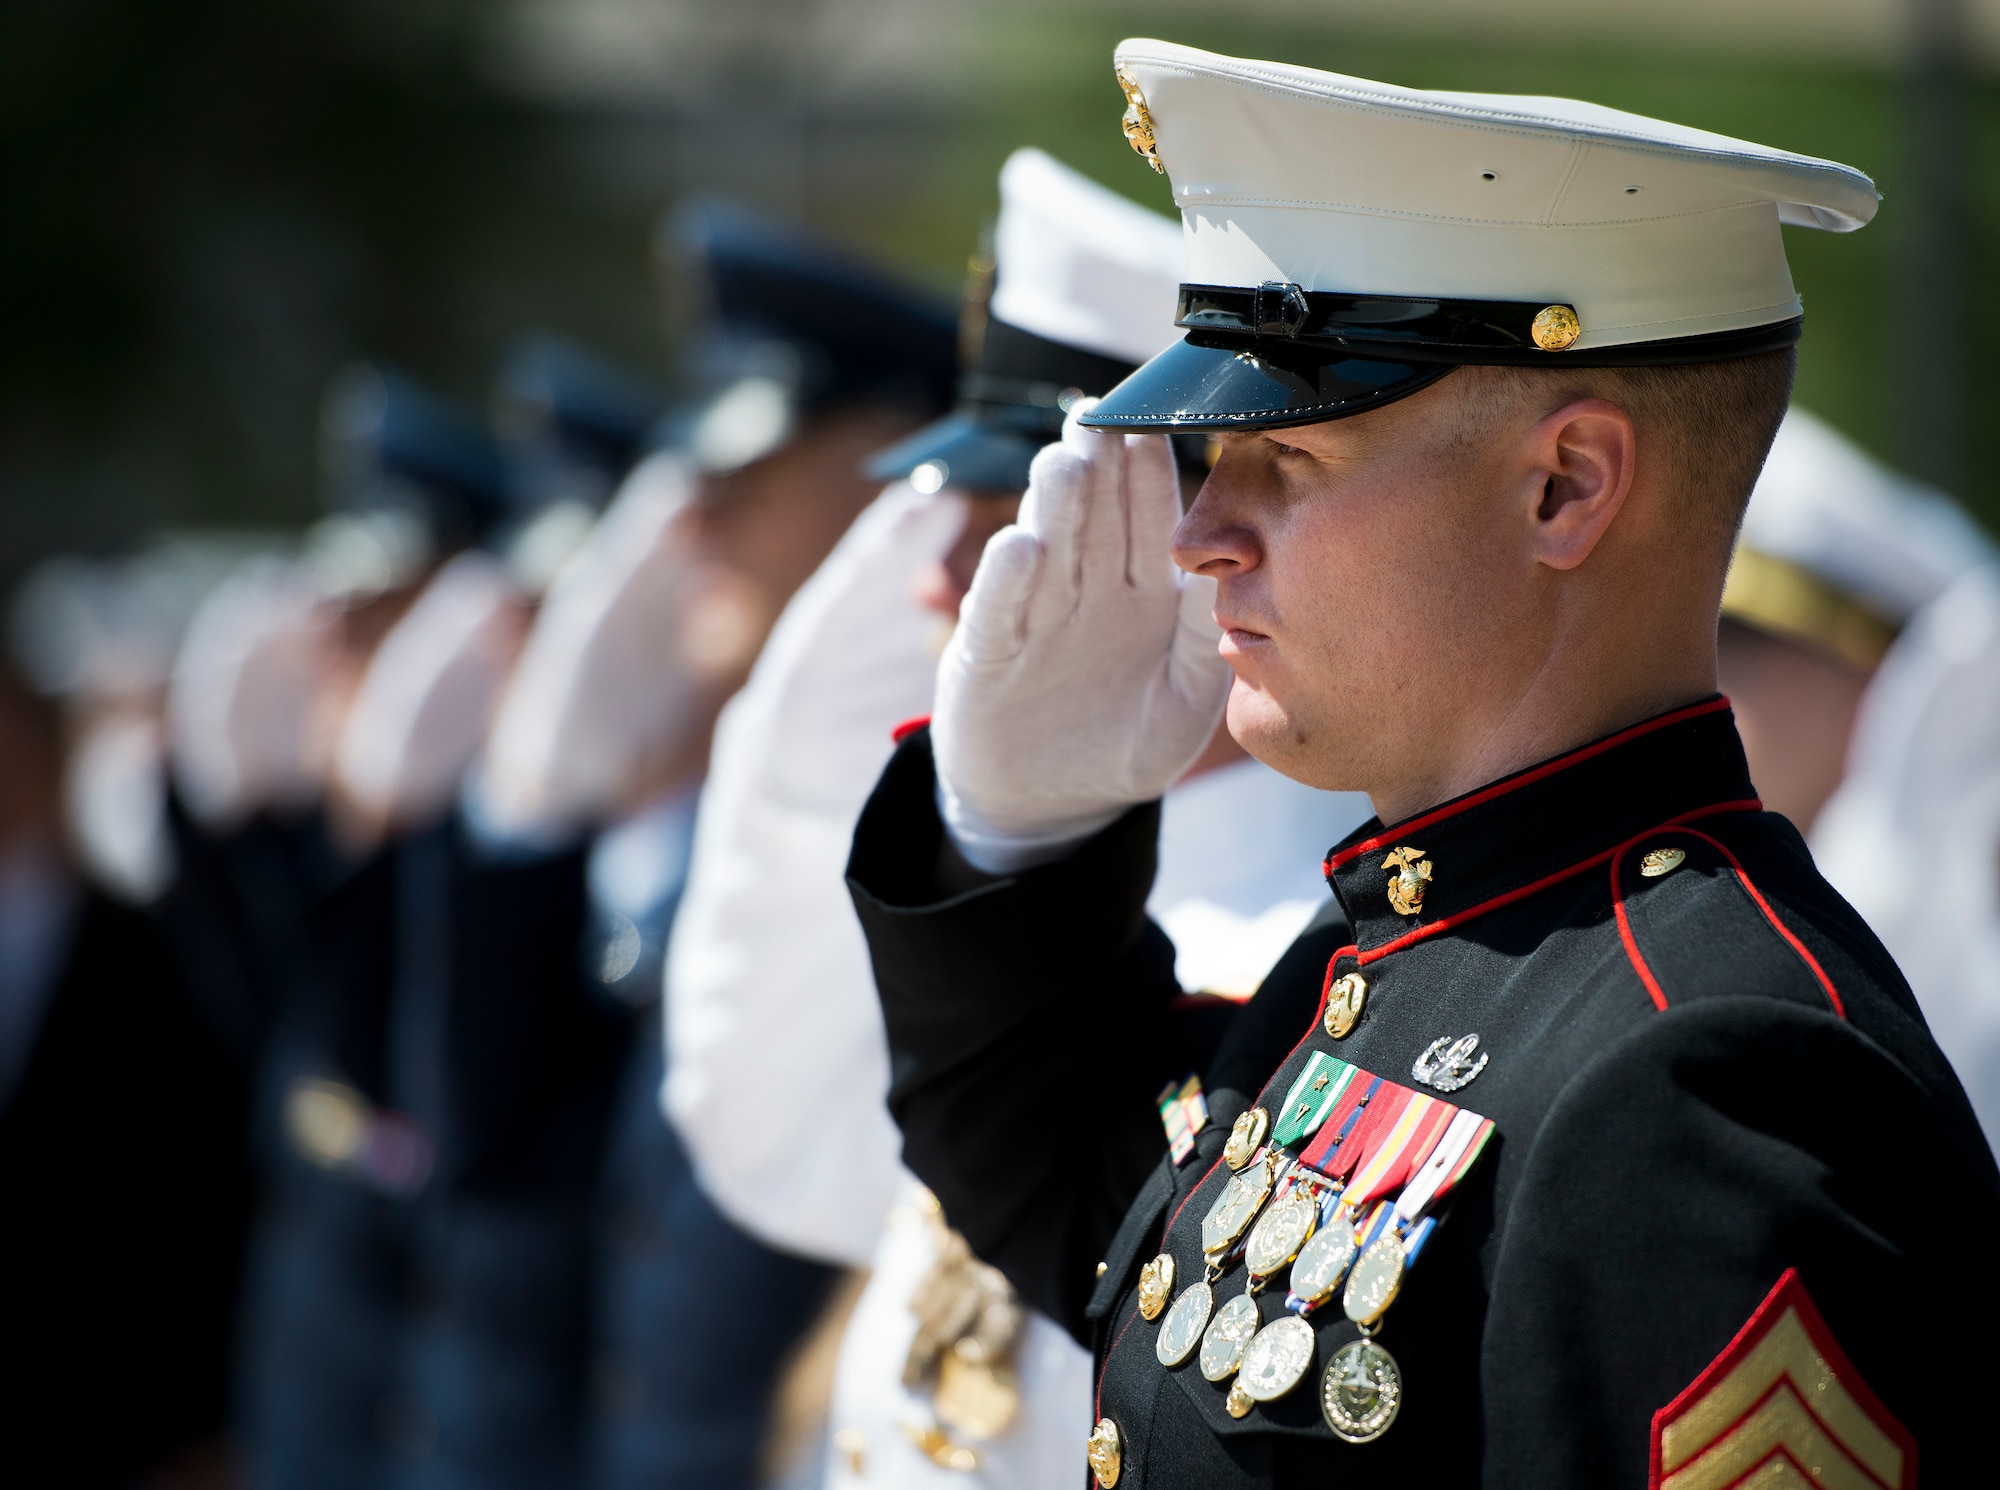 A Marine salutes during the retiring of the colors at the 45th Annual Explosive Ordnance Disposal Memorial Ceremony May 3, at Eglin Air Force Base, Fla. Eight new names of Army and Marine EOD technicians, who lost their lives, were added to the Memorial Wall this year.  The all-service total now stands at 306. (U.S. Air Force photo/Tech. Sgt. Sam King)